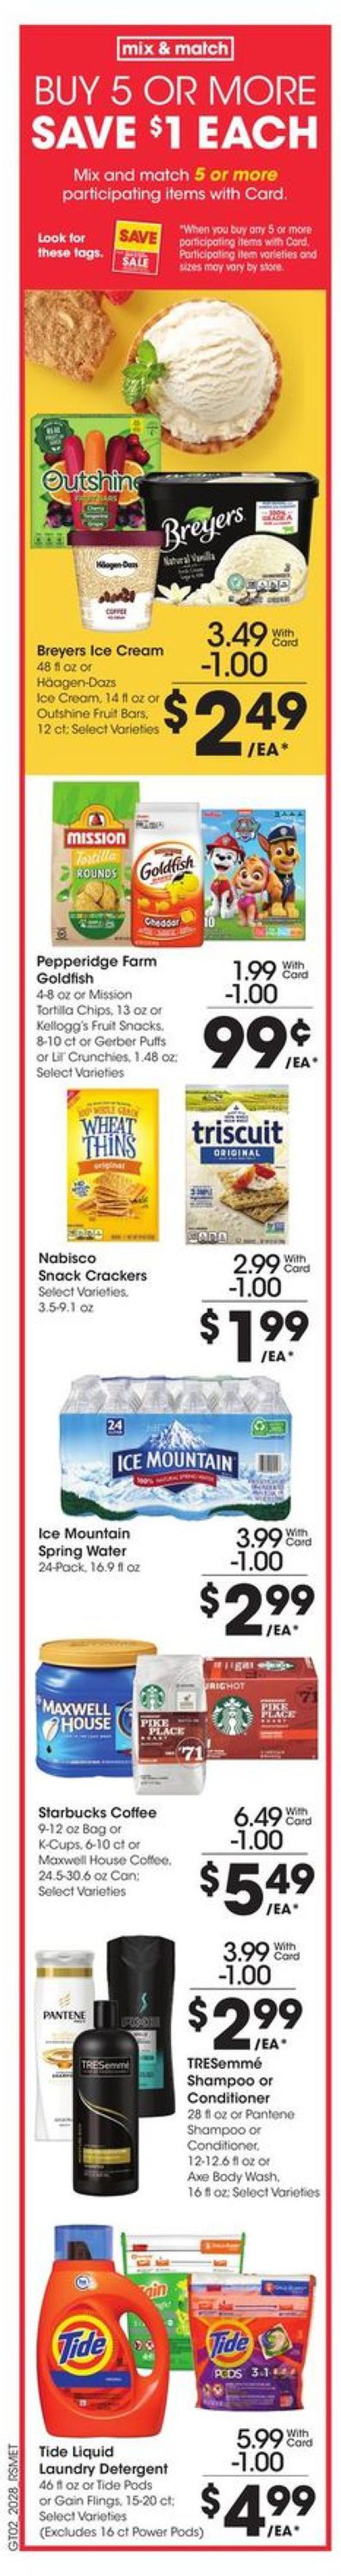 Pick ‘n Save Ad from 08/12/2020